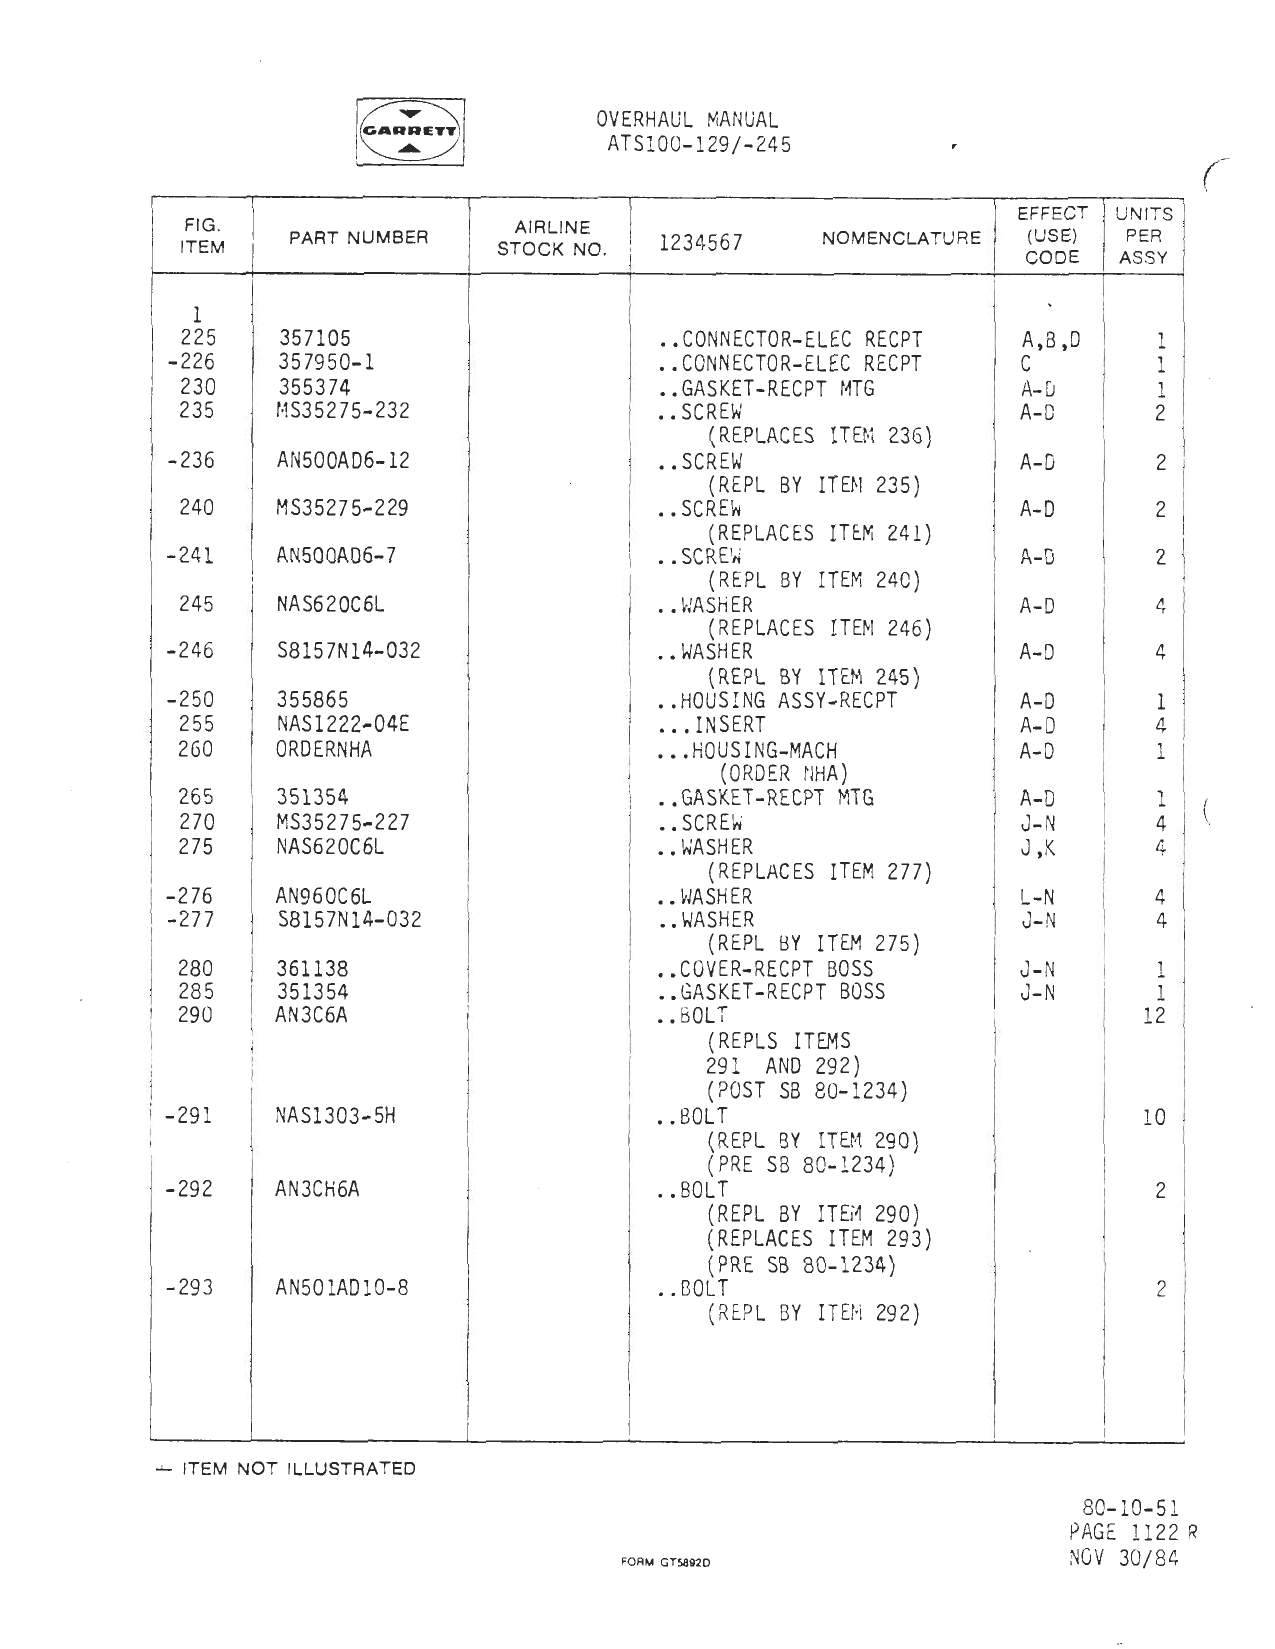 Sample page 7 from AirCorps Library document: Overhaul Manual with Illustrated Parts List for Air Turbine Engine Starter ~ INCOMPLETE